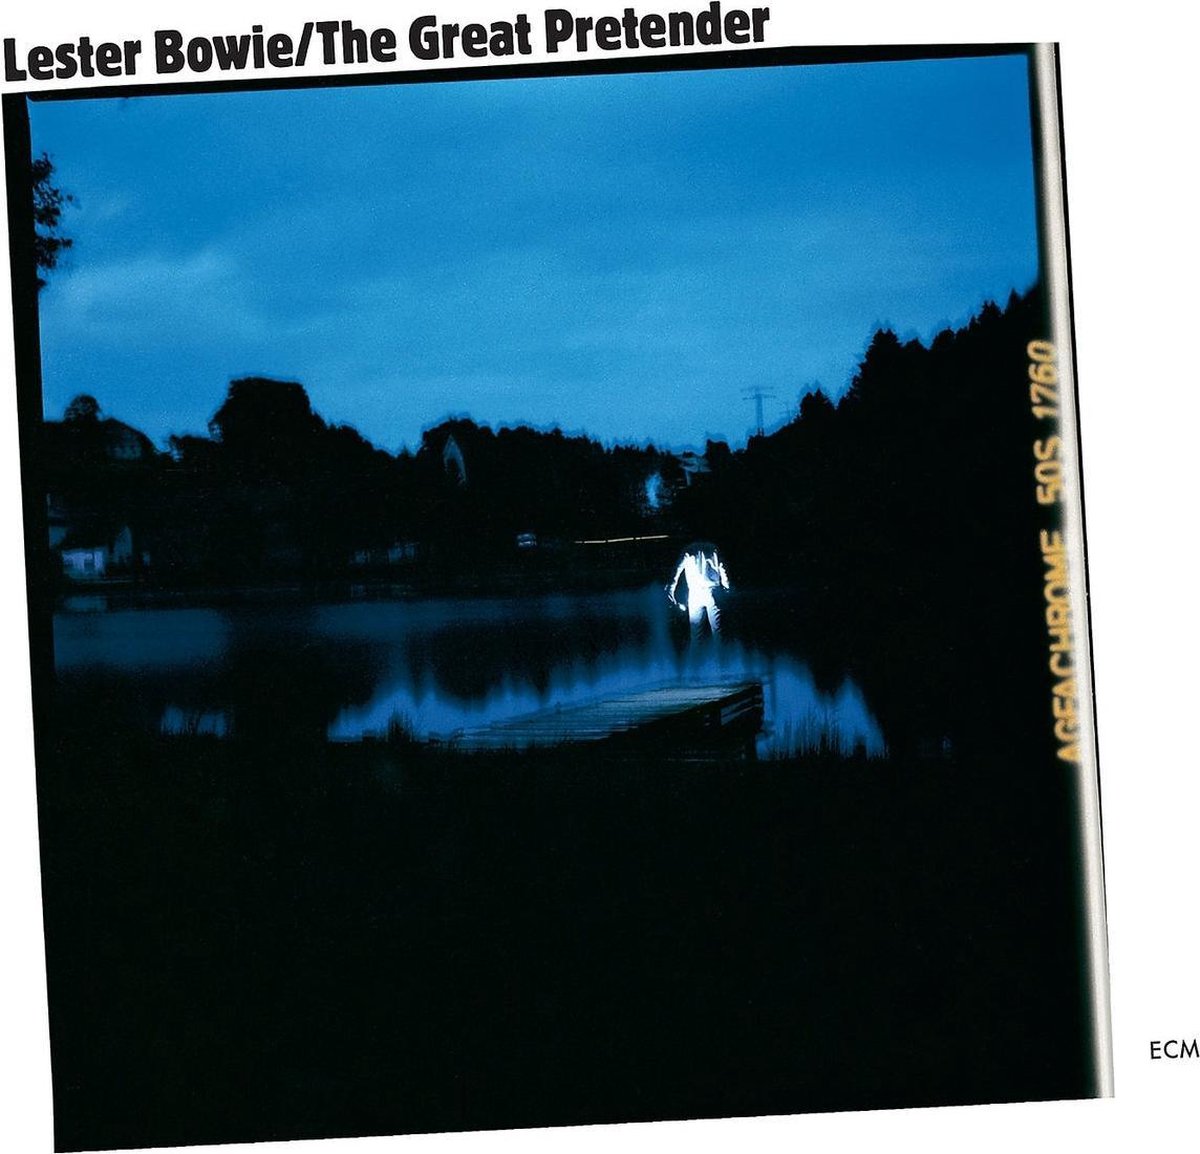 The Great Pretender | Lester Bowie